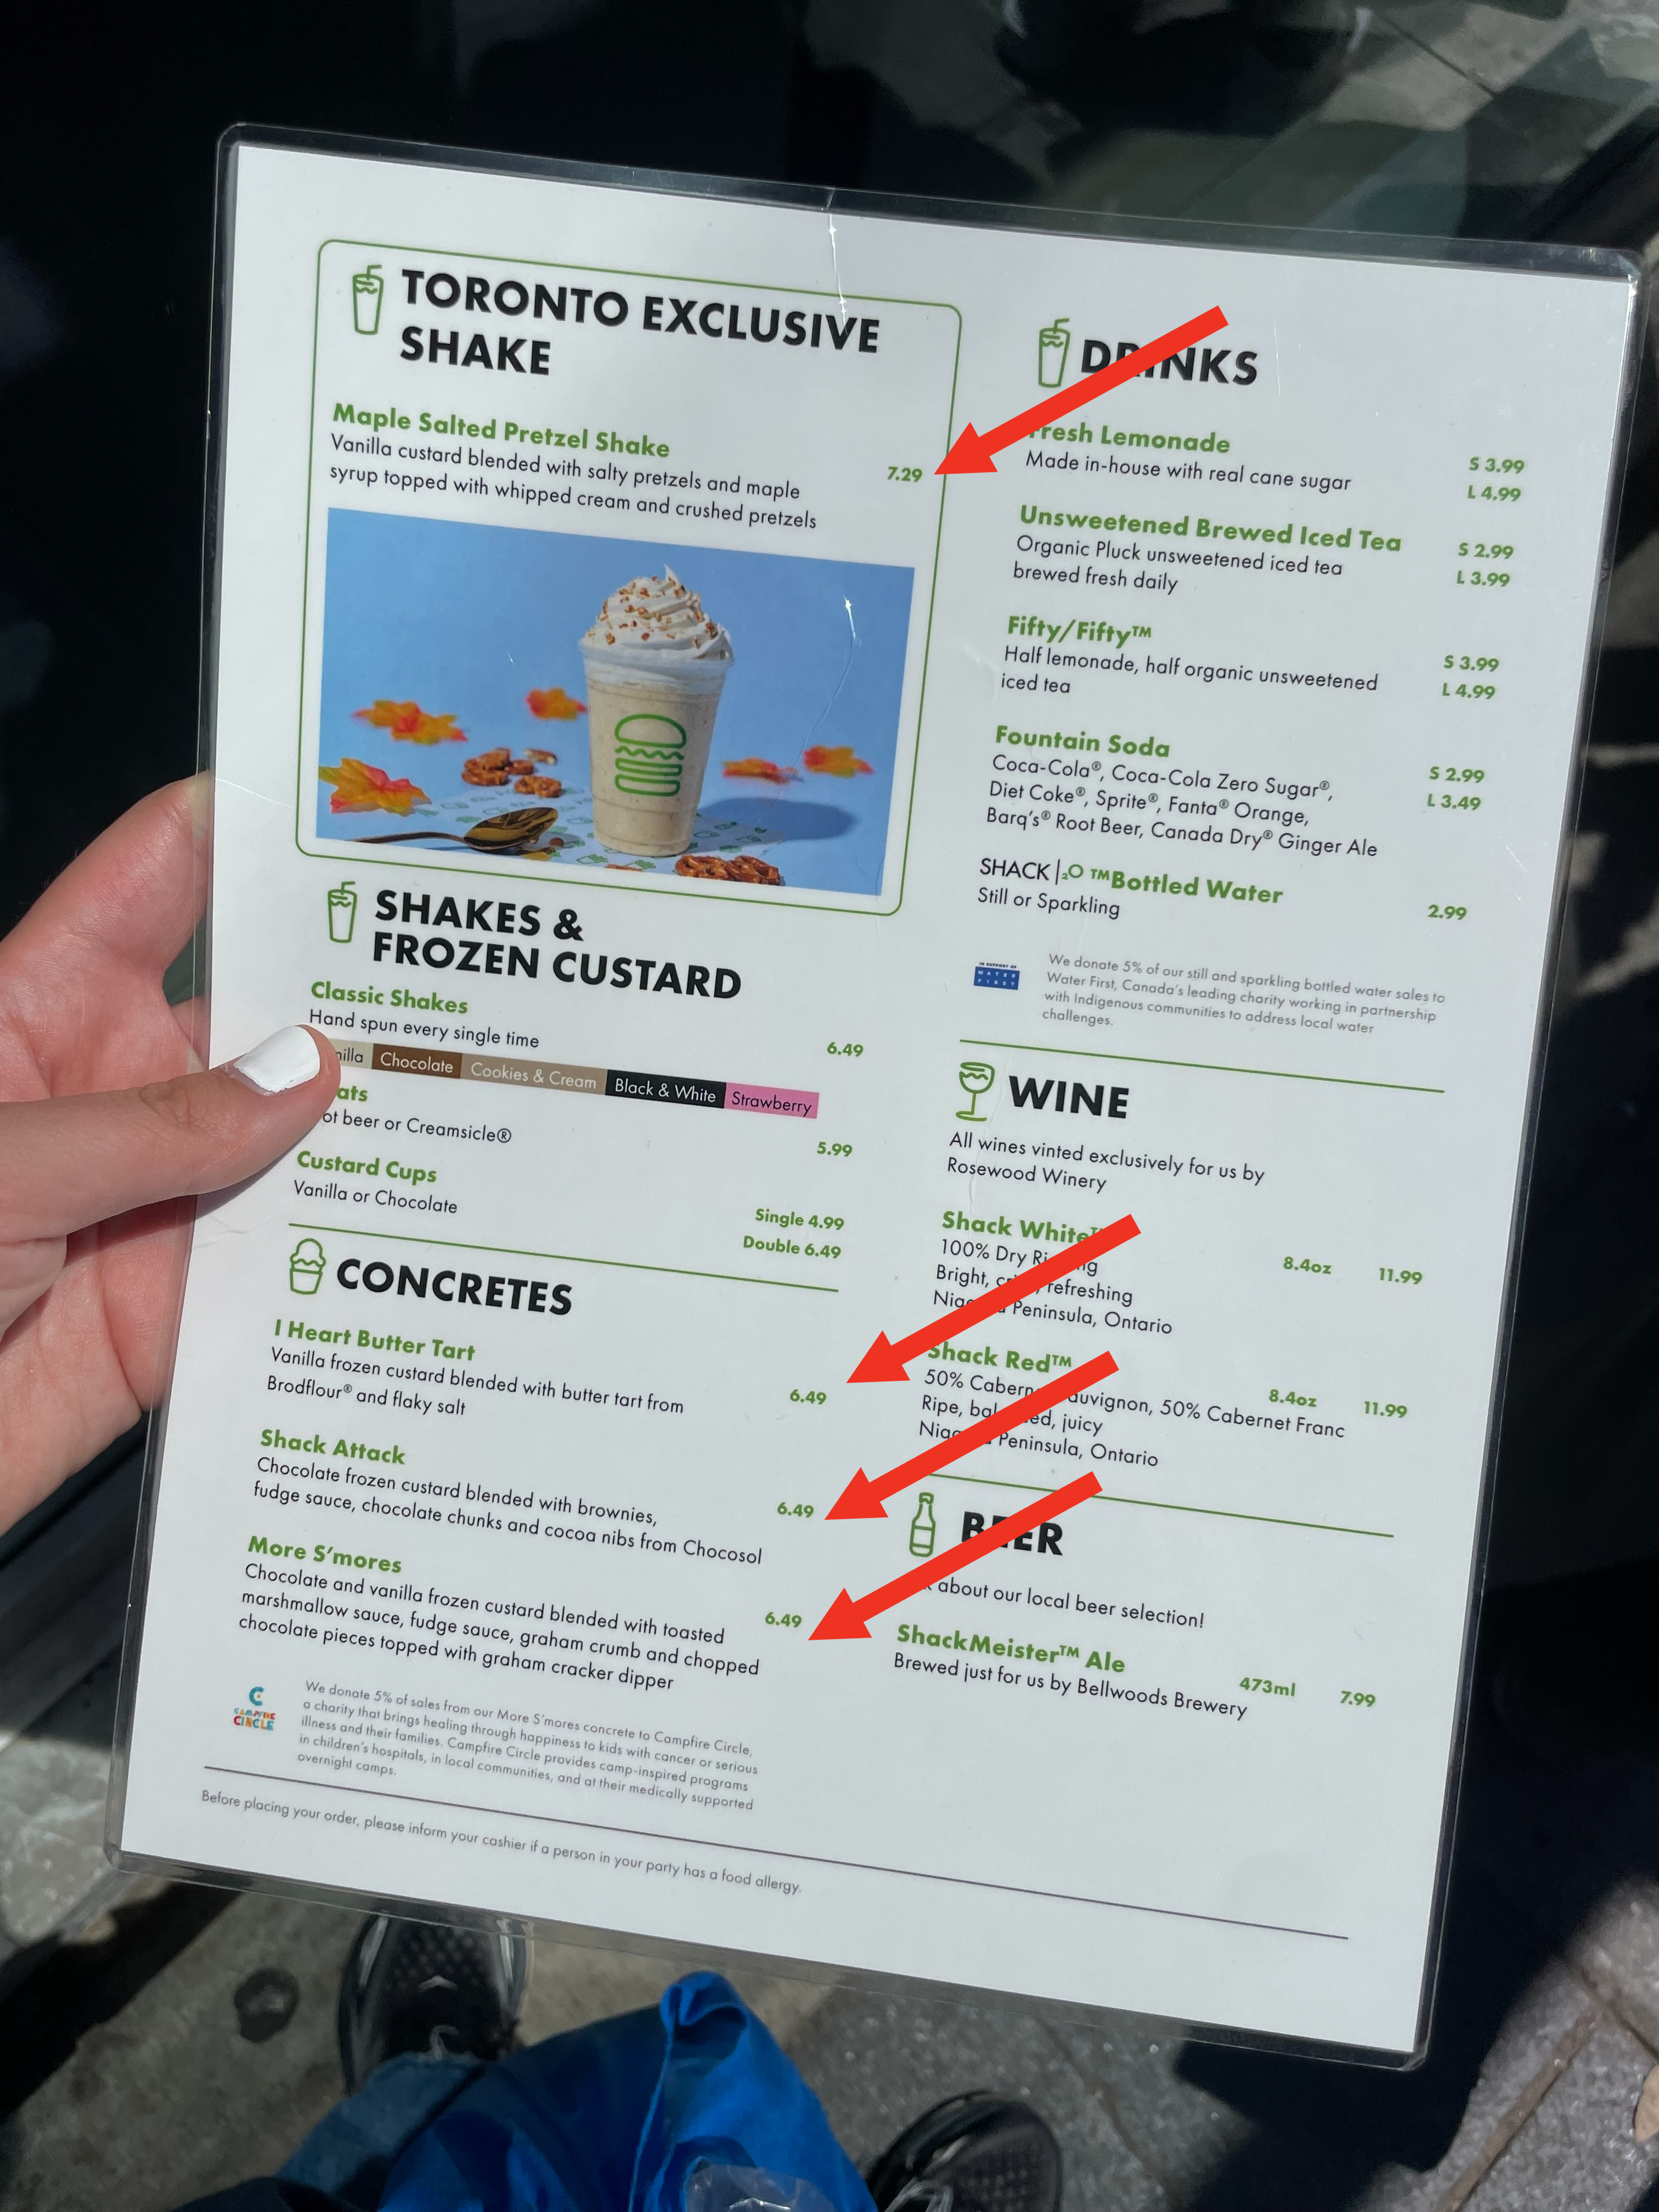 Menu from Shake Shack featuring Toronto Exclusive Shake, classic shakes, custard concretes, drinks, lemonade, beer, and a kid&#x27;s section